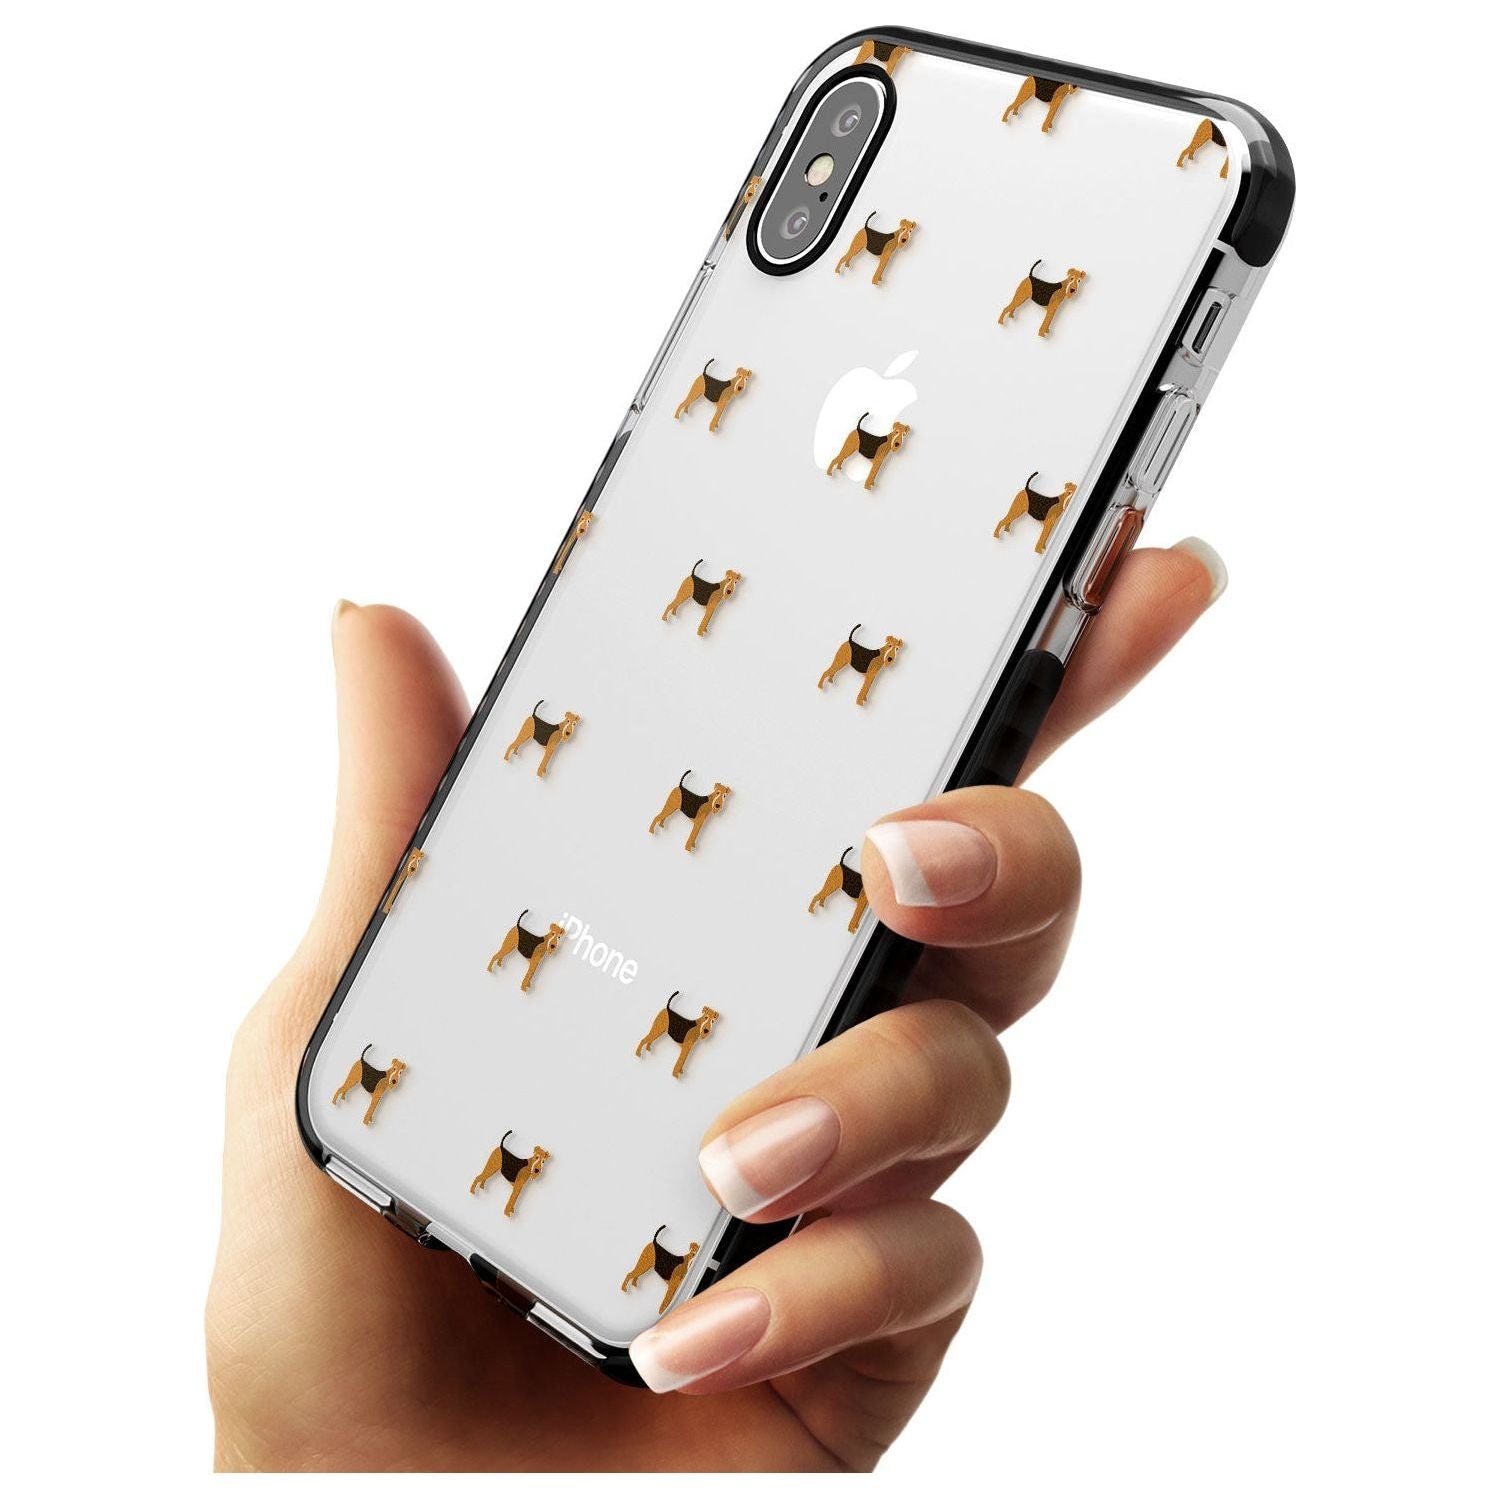 Airedale Terrier Dog Pattern Clear Black Impact Phone Case for iPhone X XS Max XR